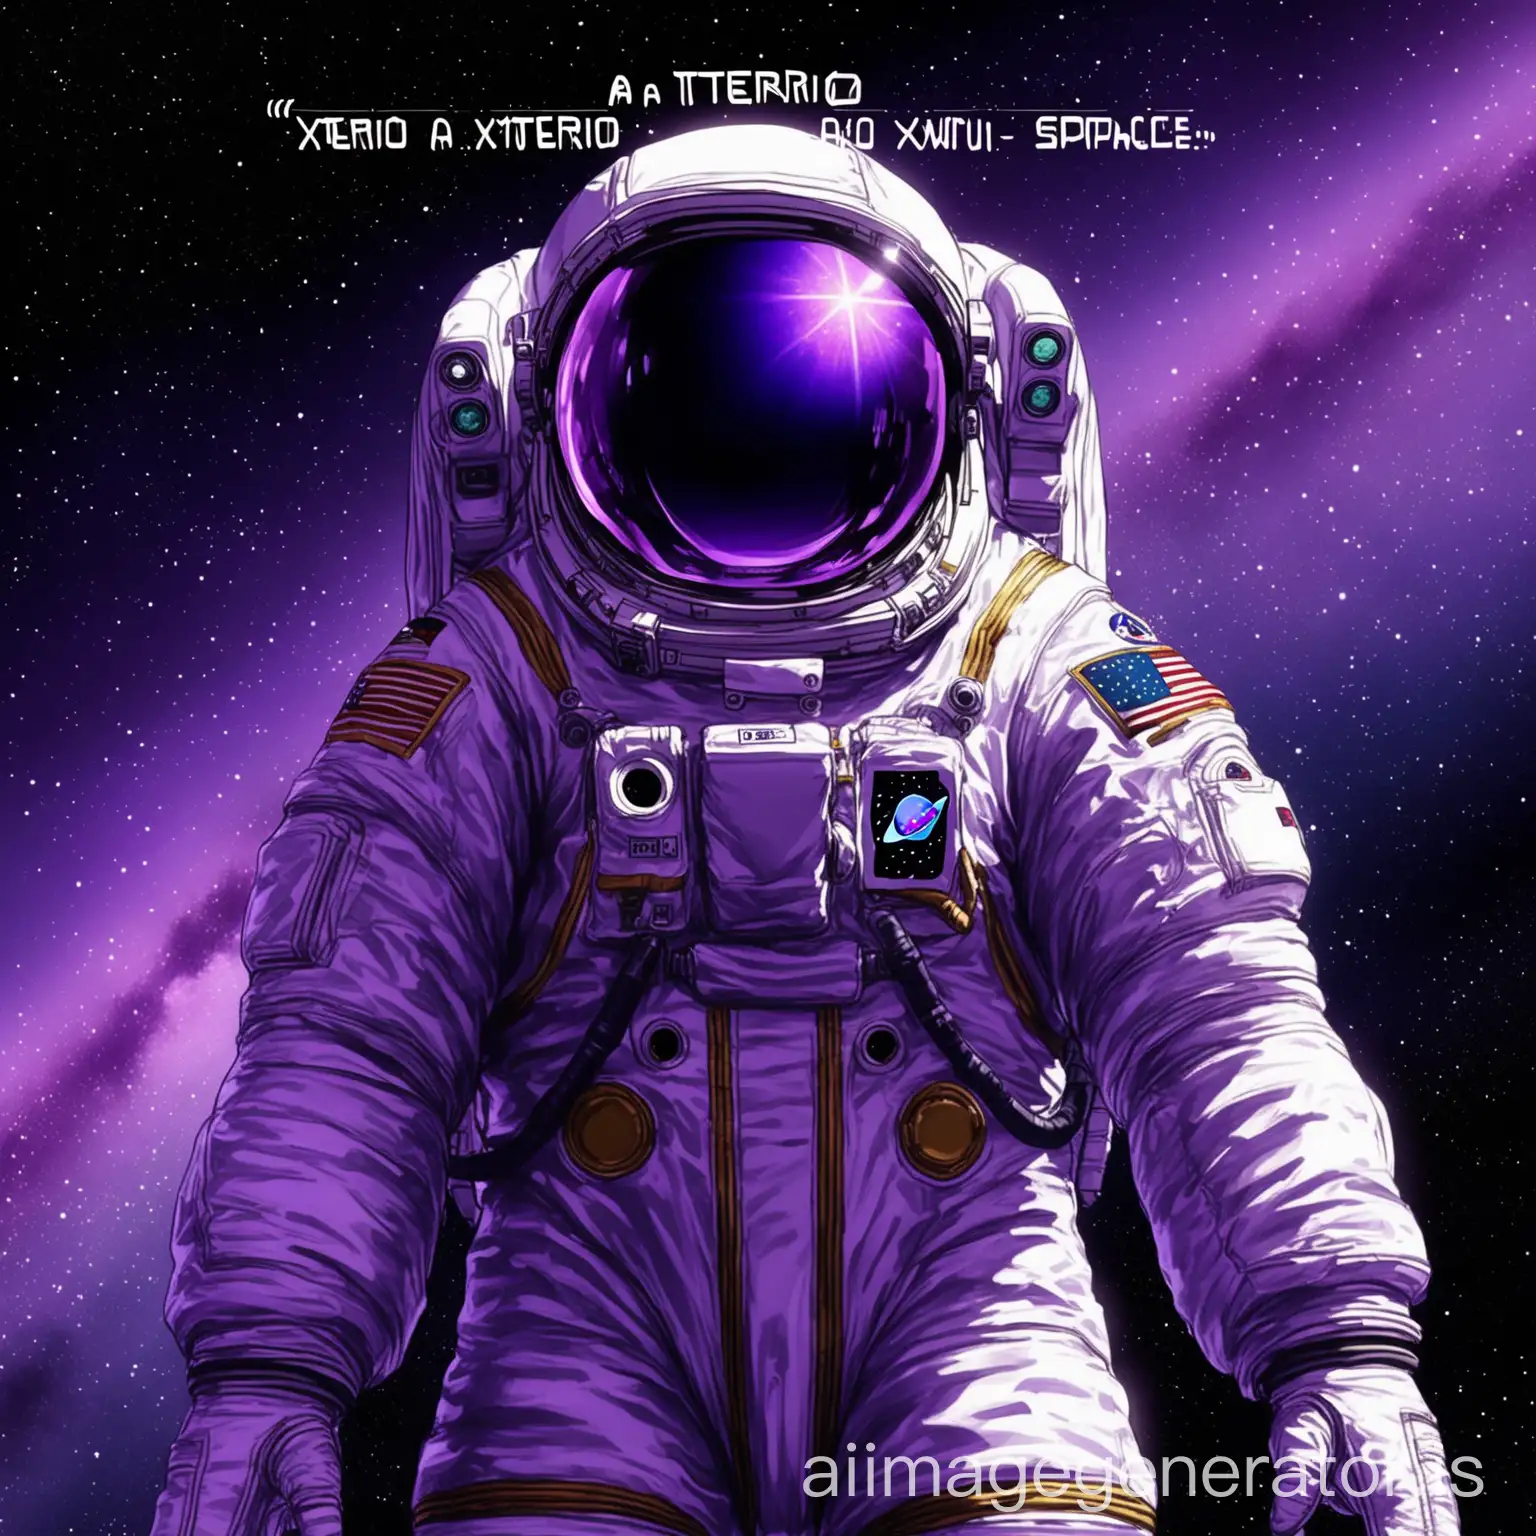 HighQuality-Purple-Space-Scene-with-Astronauts-in-Spacesuits-and-Xterio-Text